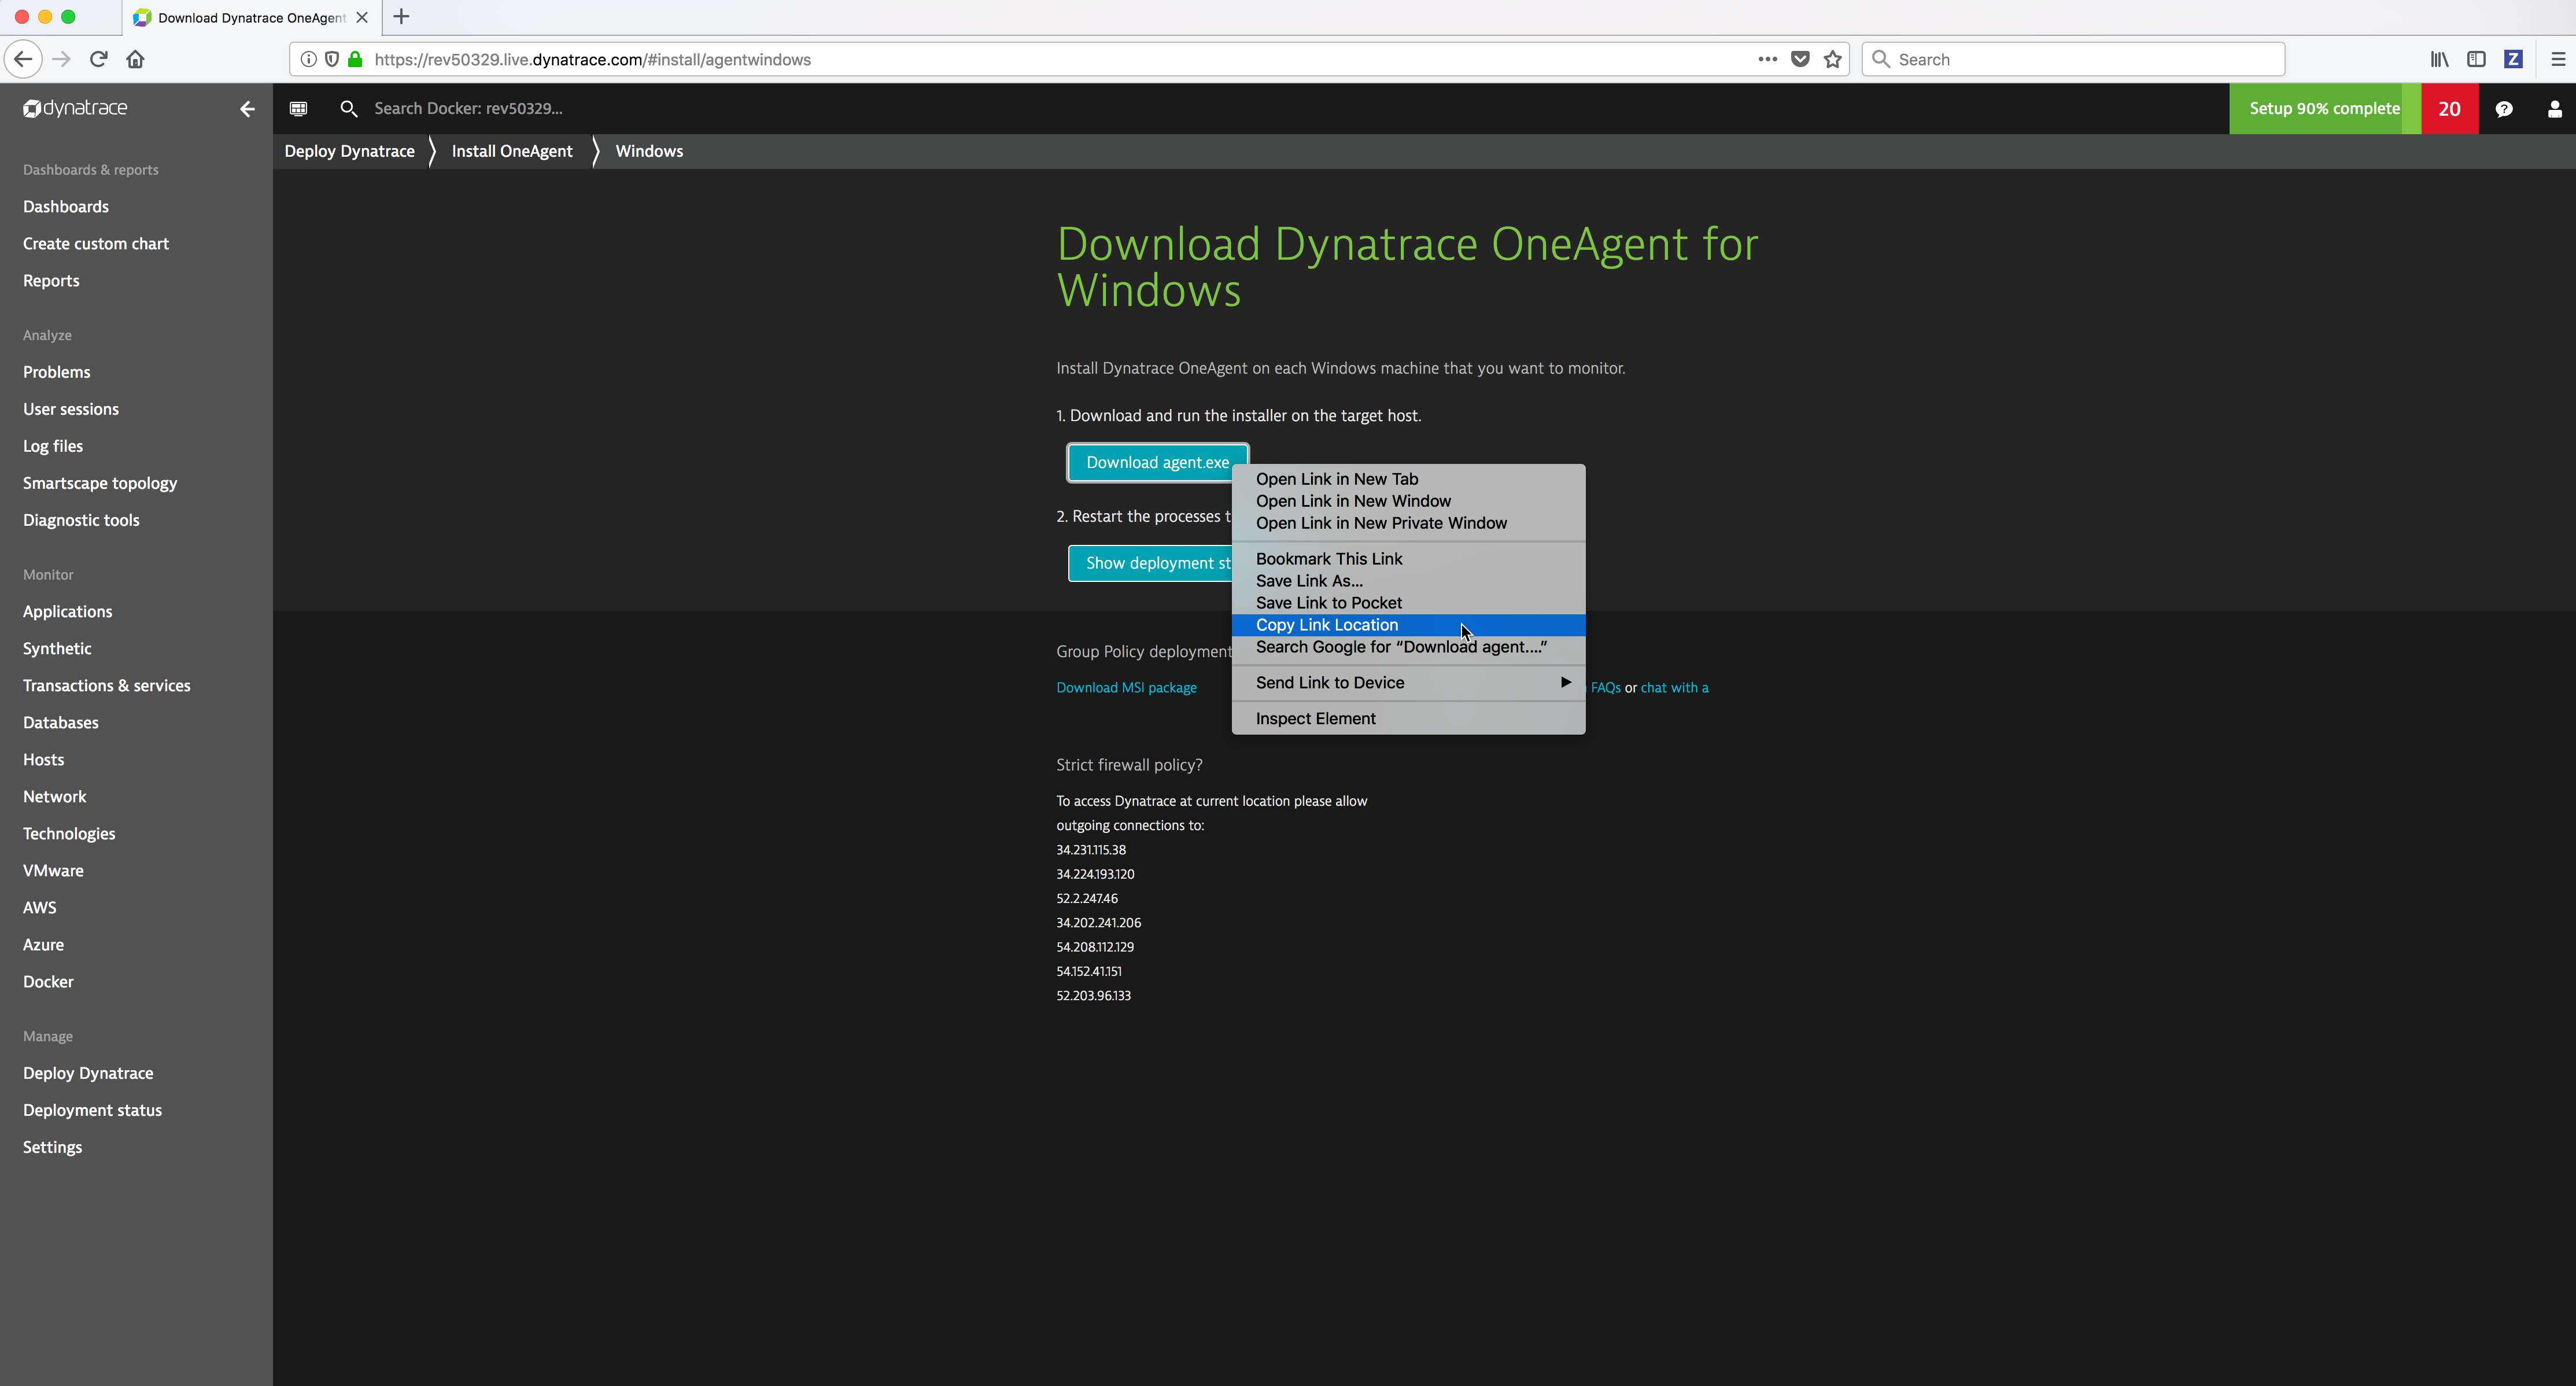 View Dynatrace OneAgent Installer